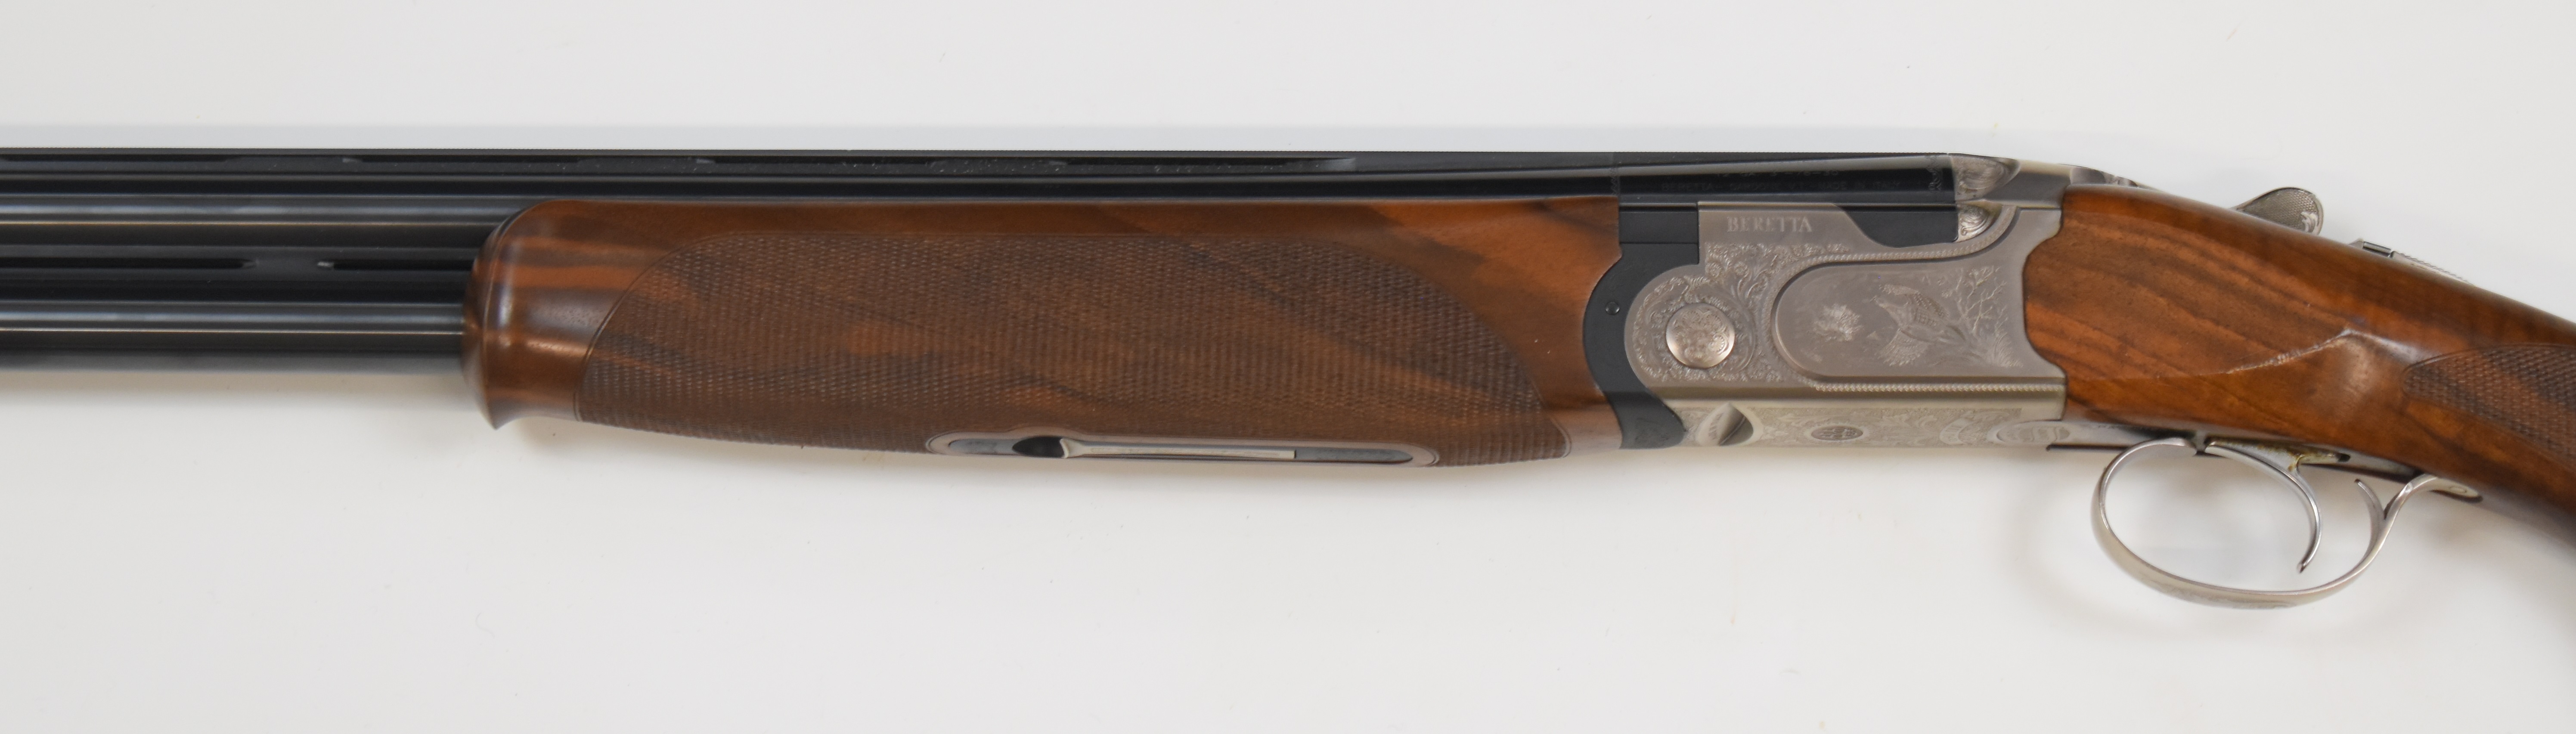 Beretta 690 III Sporting 12 bore over and under ejector shotgun with named and engraved scenes of - Image 9 of 15